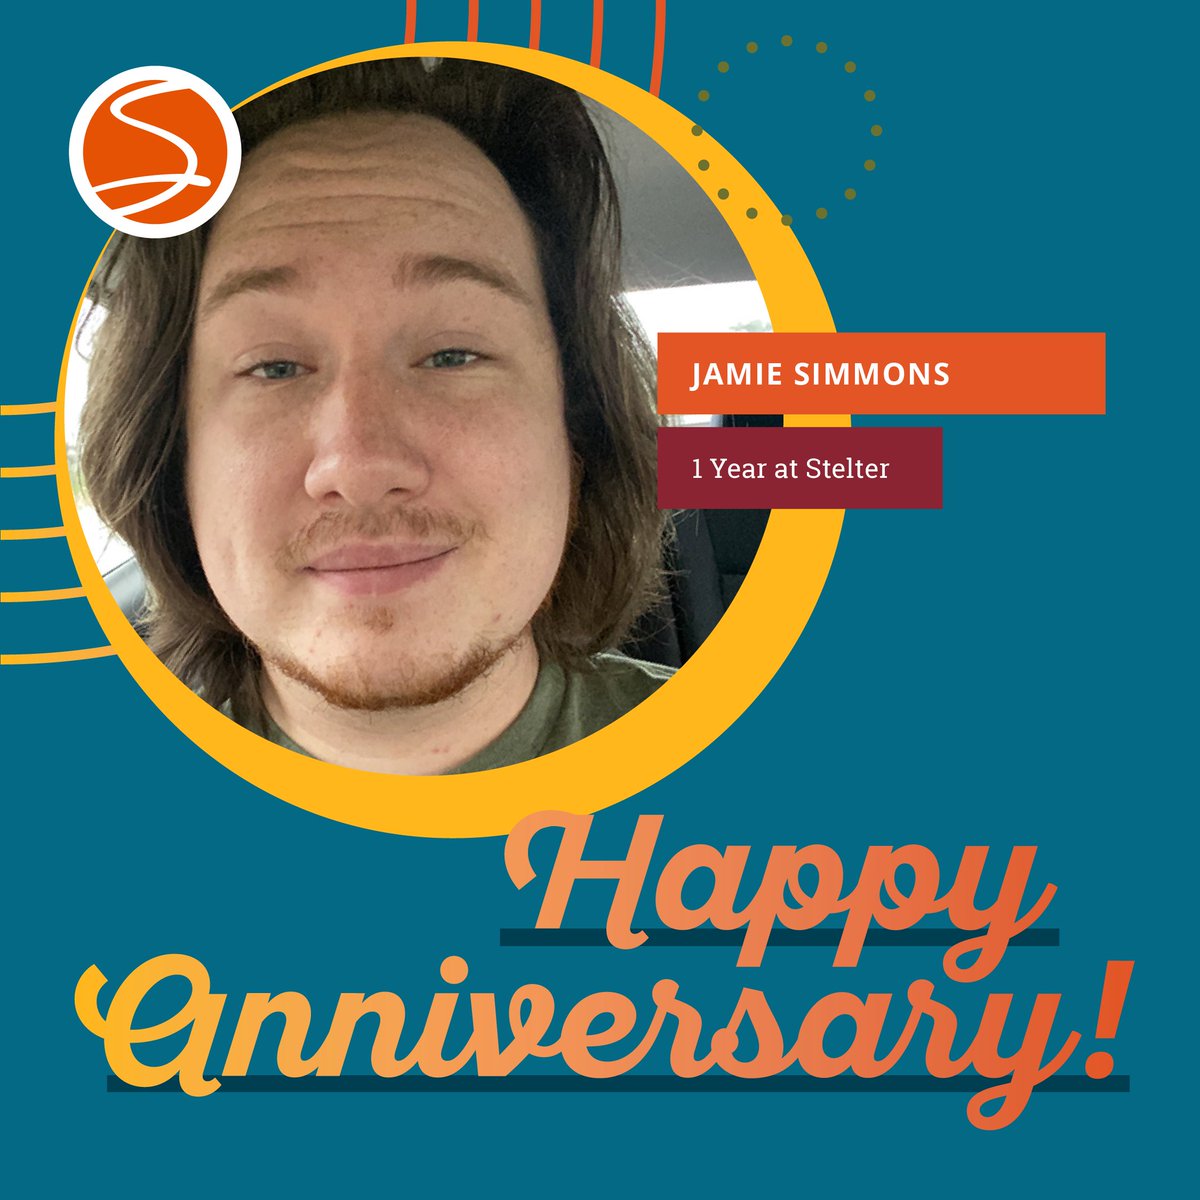 Shoutout to our Content Specialist, Jamie Simmons, on their 1-year anniversary! 🎉
Fun fact: not only is Jamie a fantastic writer, they are also a great singer and studied opera in college. 🎶

#happyanniversary #meettheteam #employeespotlight #staffspotlight #plannedgiving